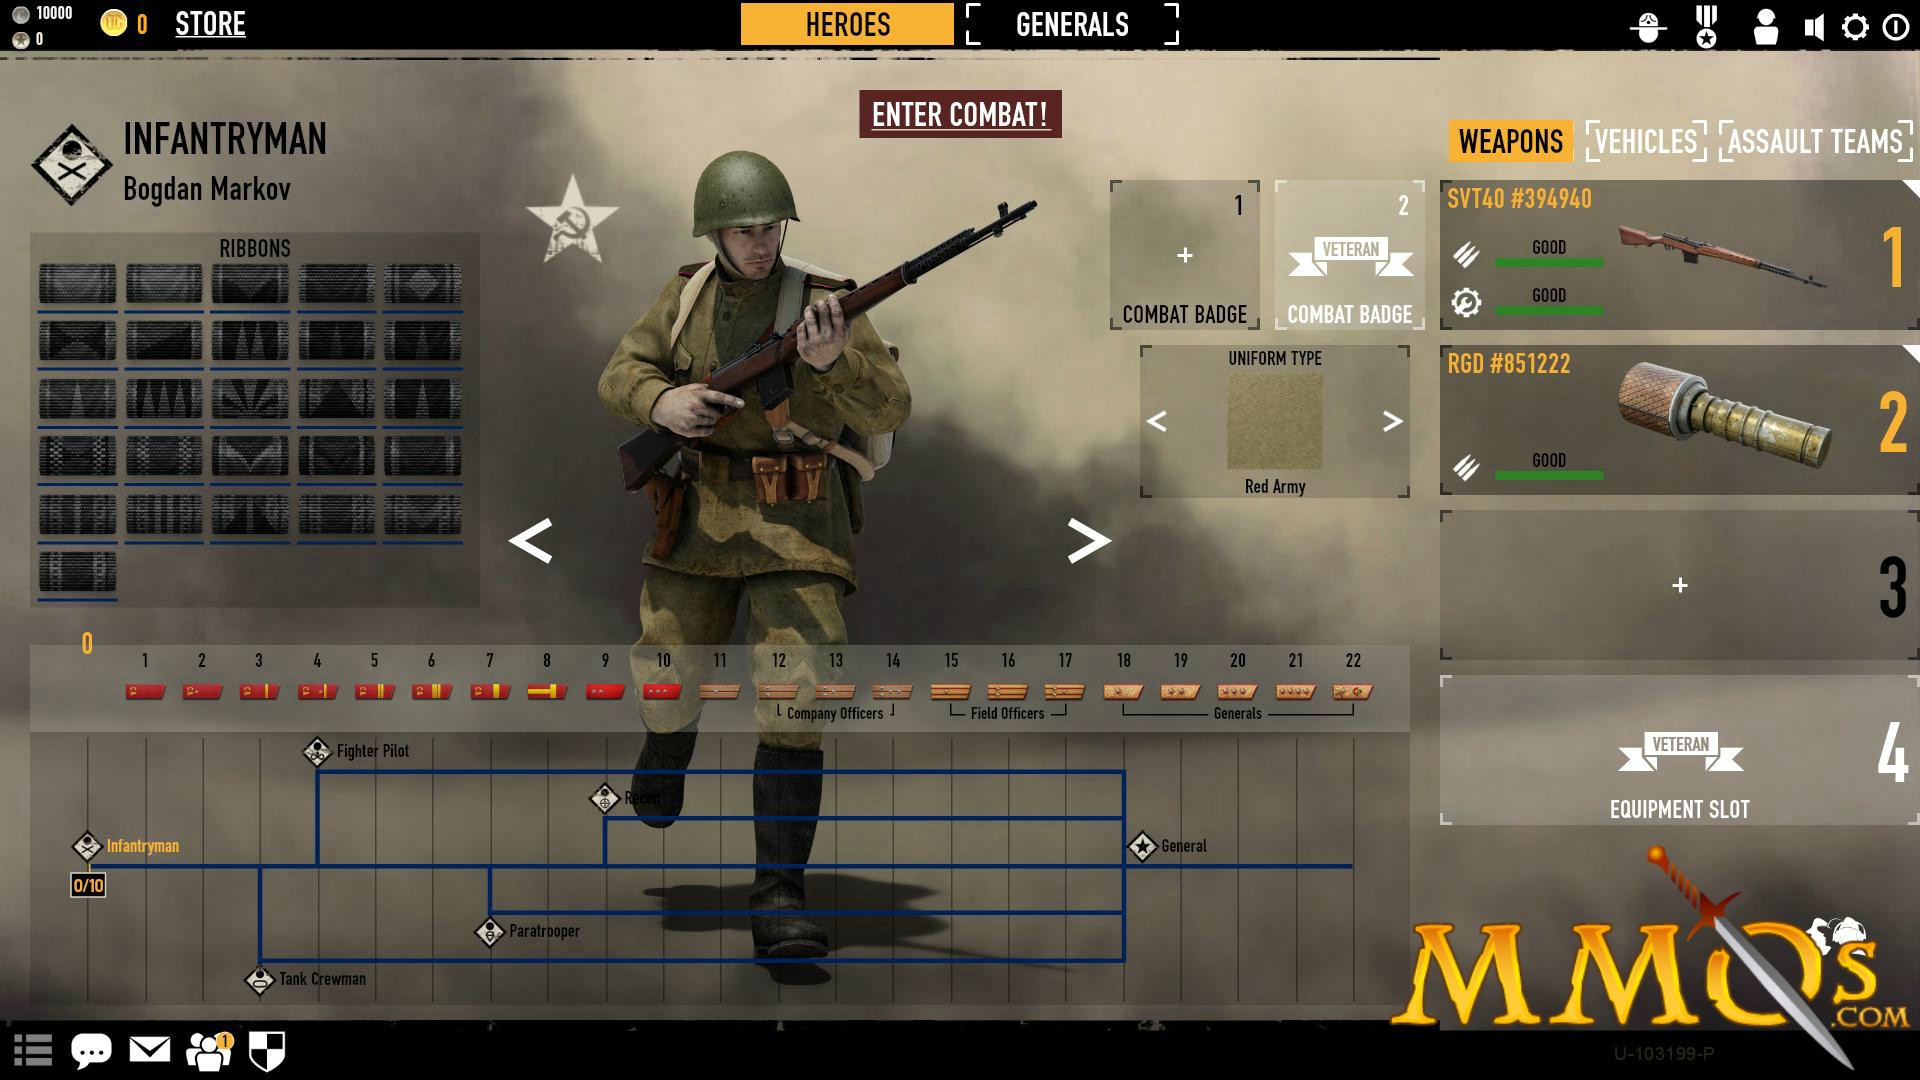 heroes and generals how to get credits